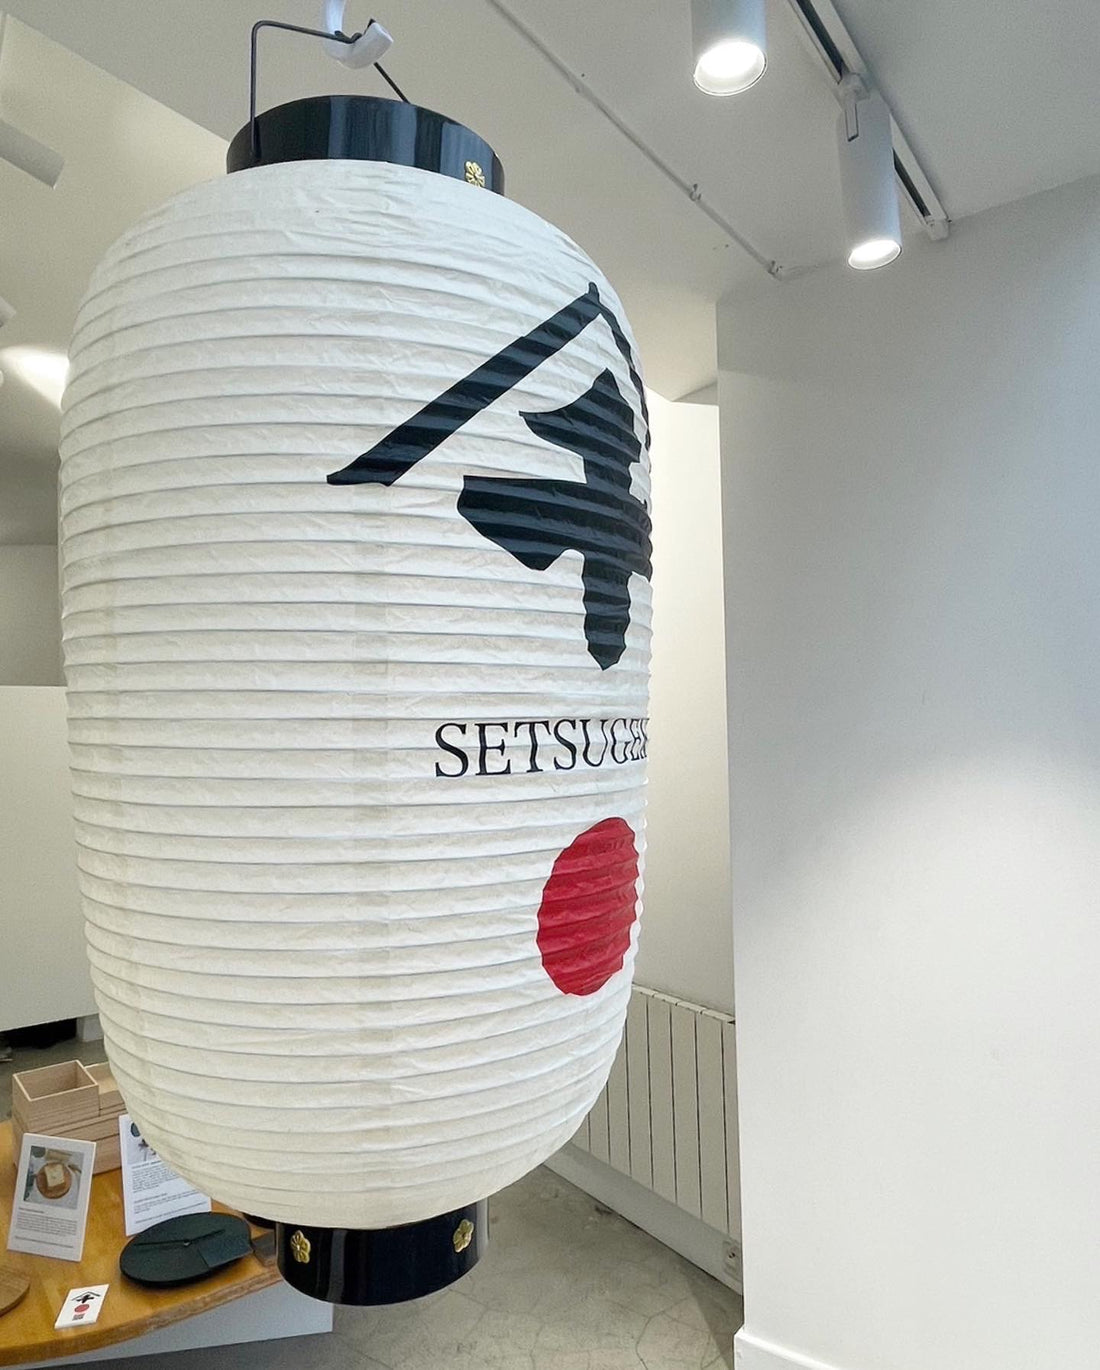 Pop-up Exhibition “Less is More” in Japanese Everyday Design